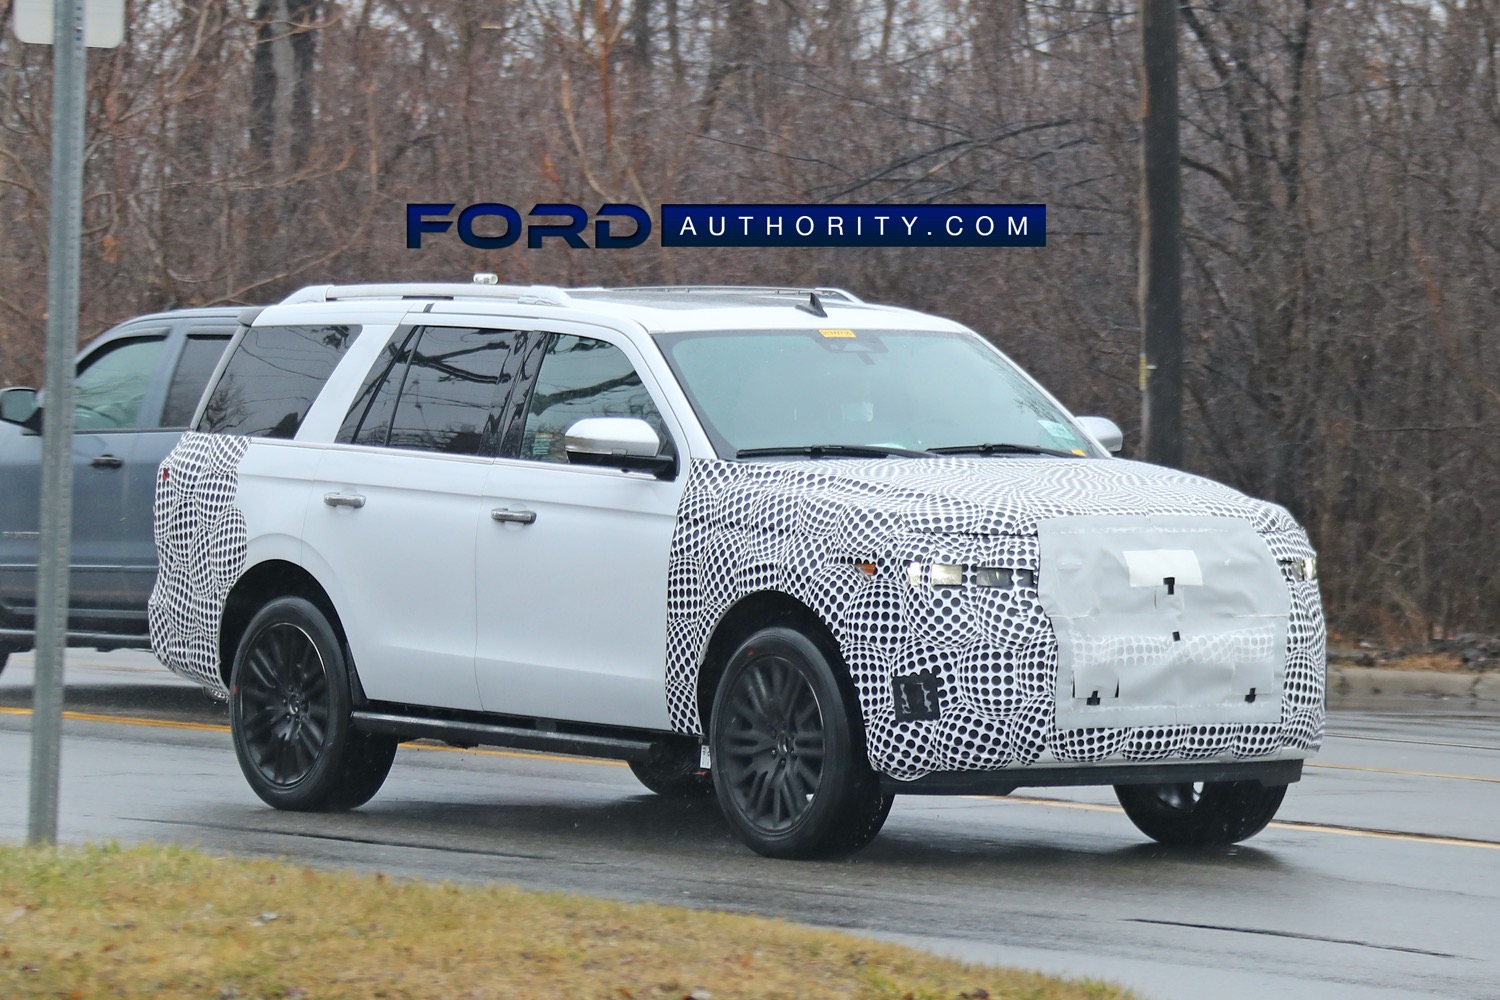 2022 Ford Expedition: Here's What We Expect From The Refreshed SUV